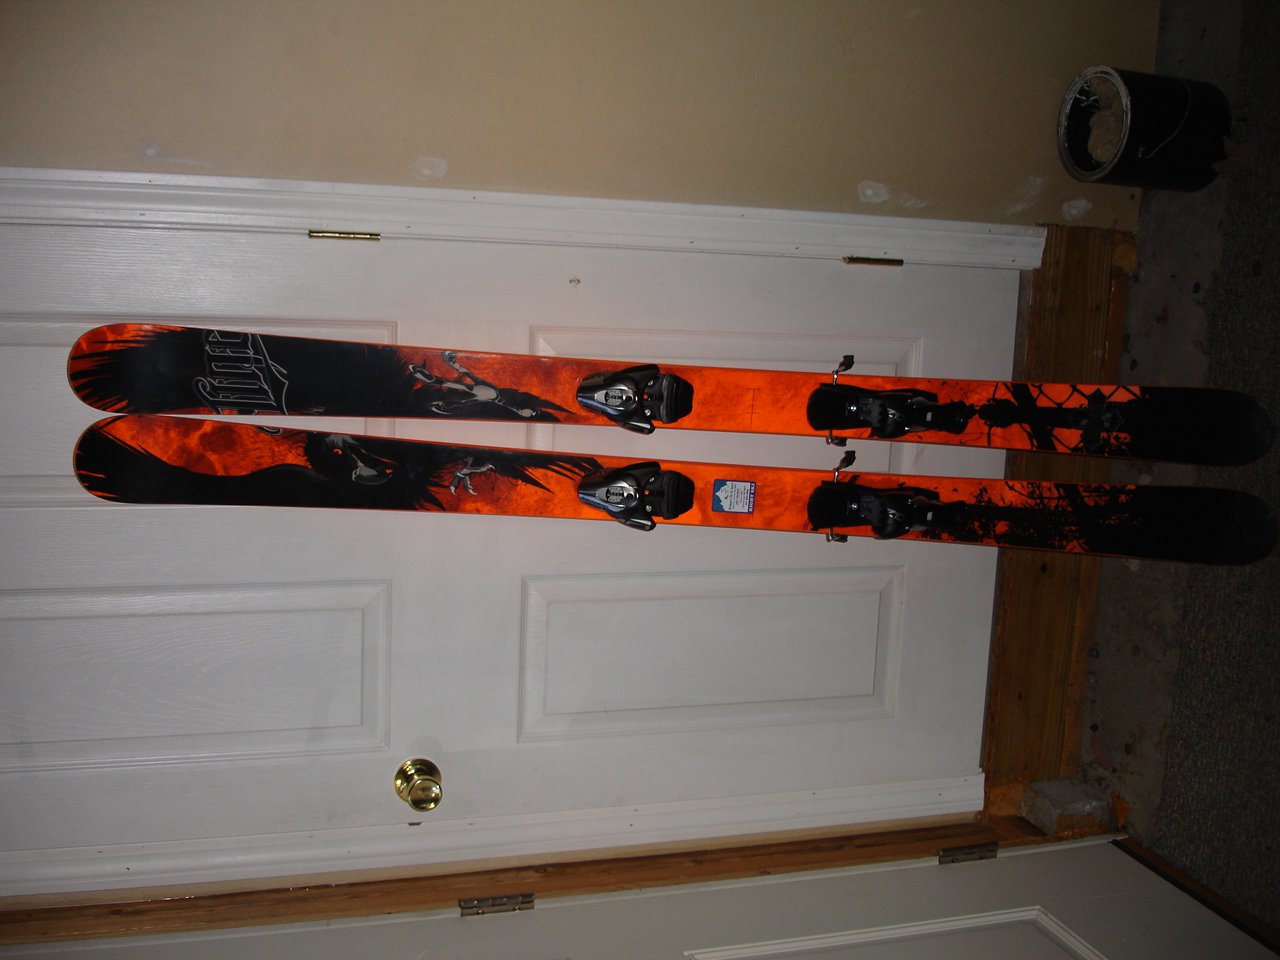 My New Skis